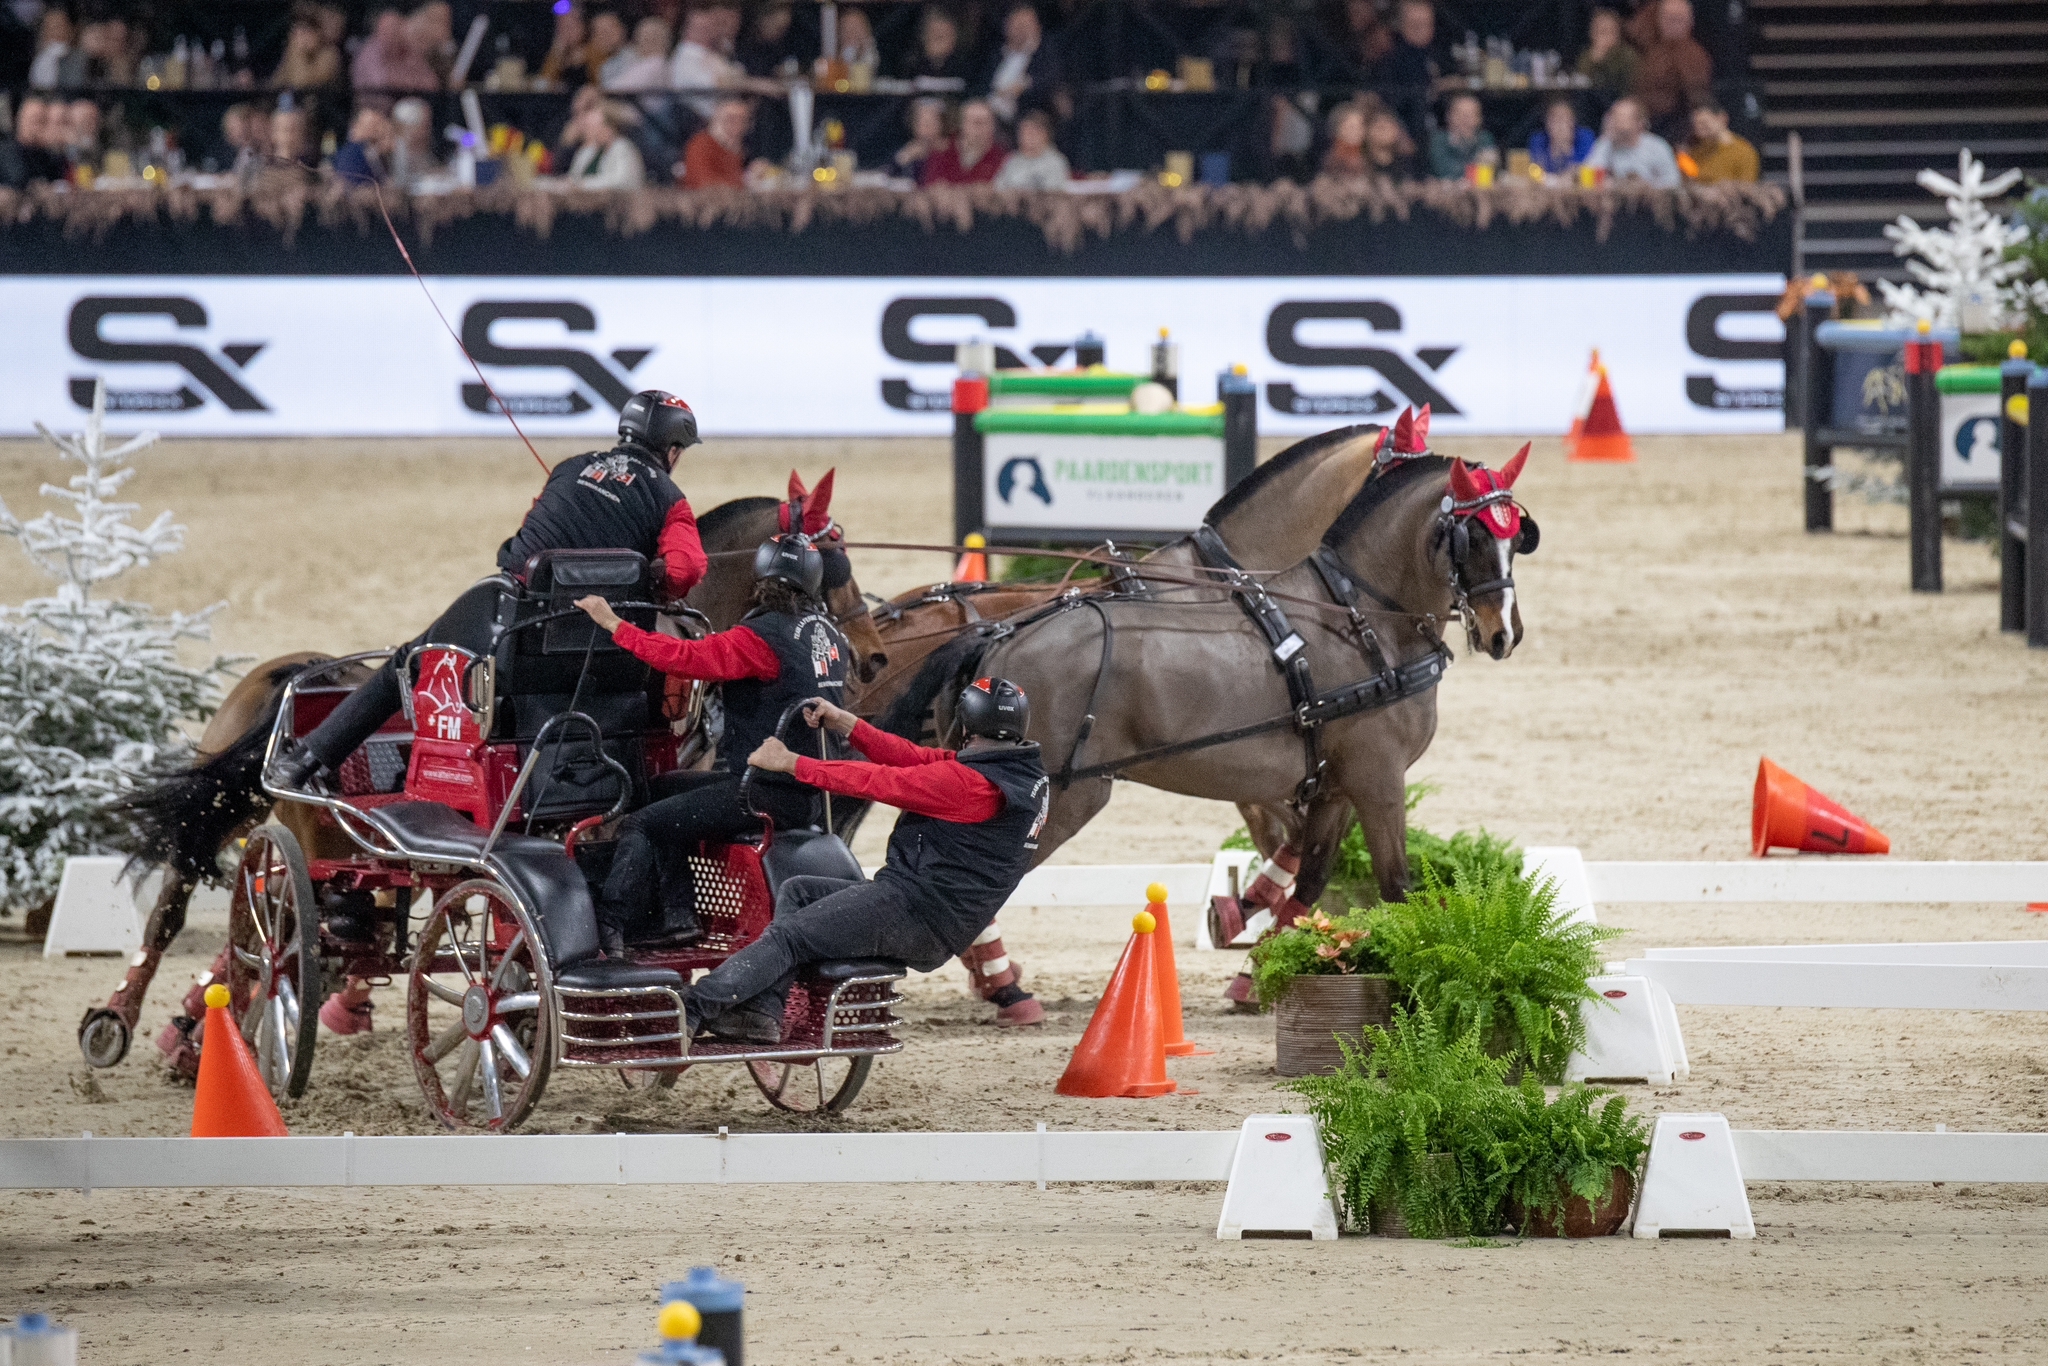 Jerome Voutaz surpresses Dutch competition in Opening Class FEI Driving World Cup